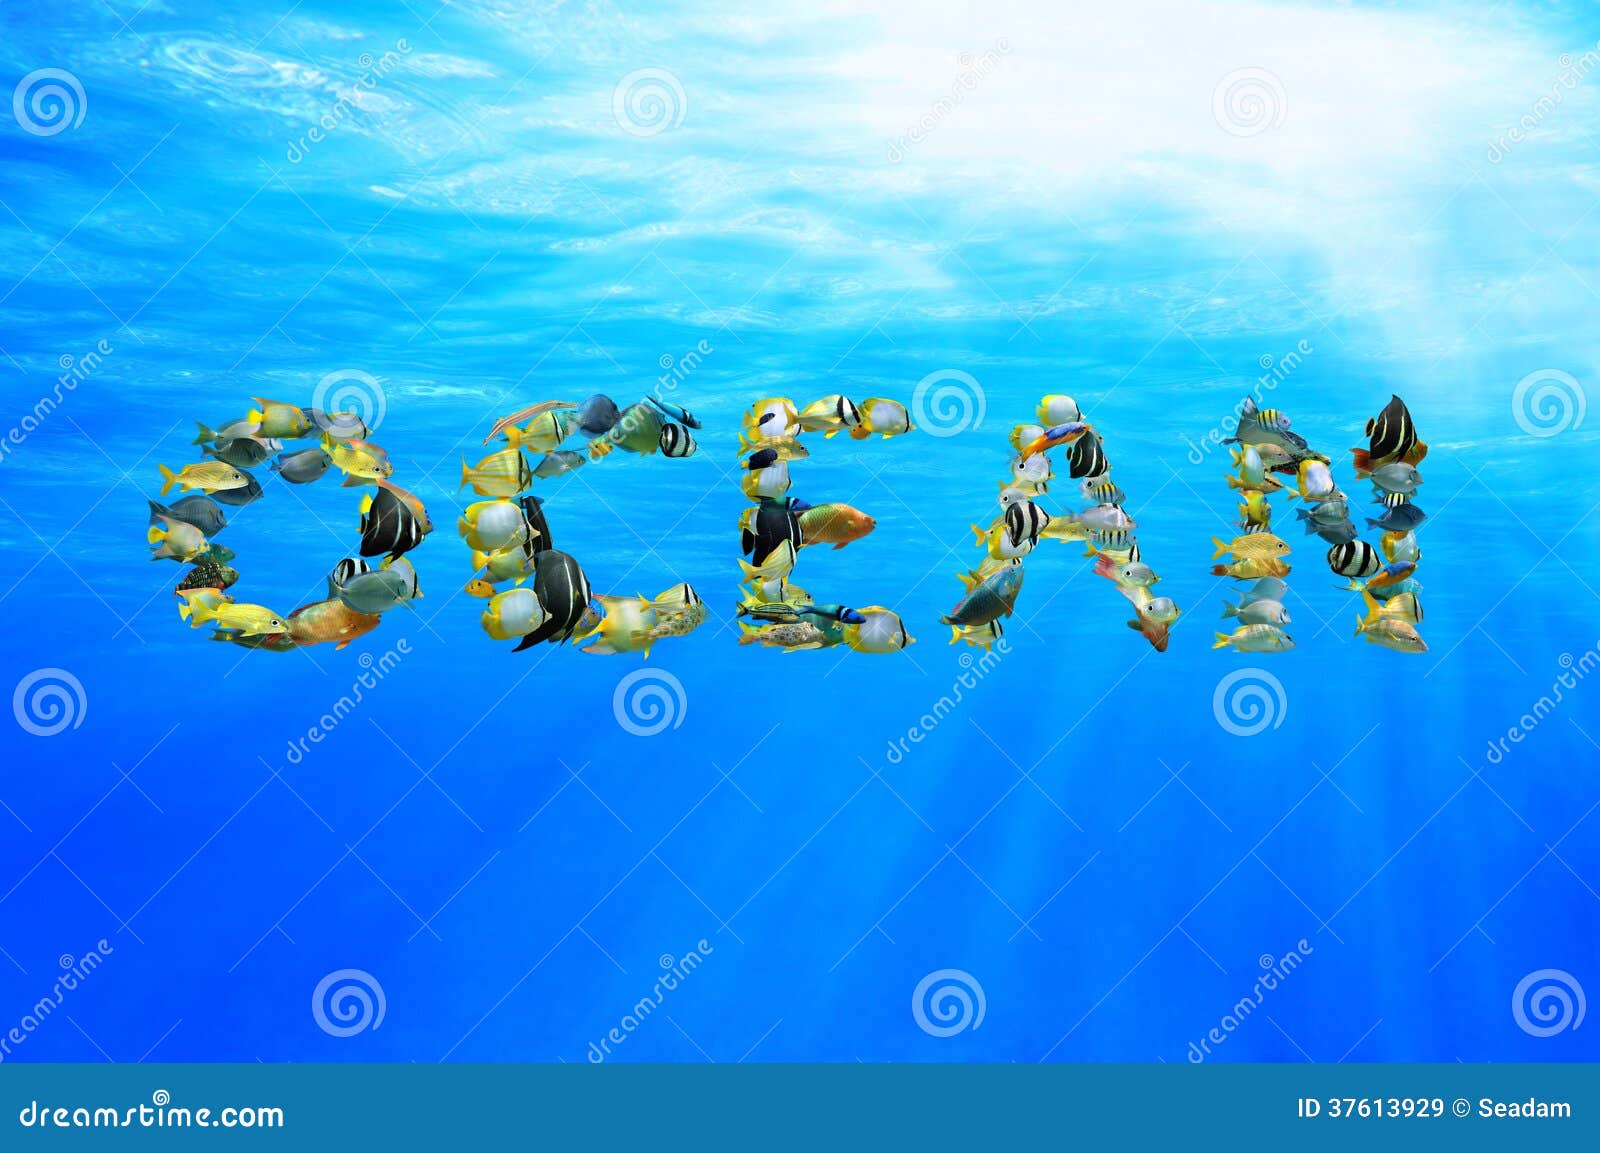 Underwater Word OCEAN Composed From Fish Royalty Free